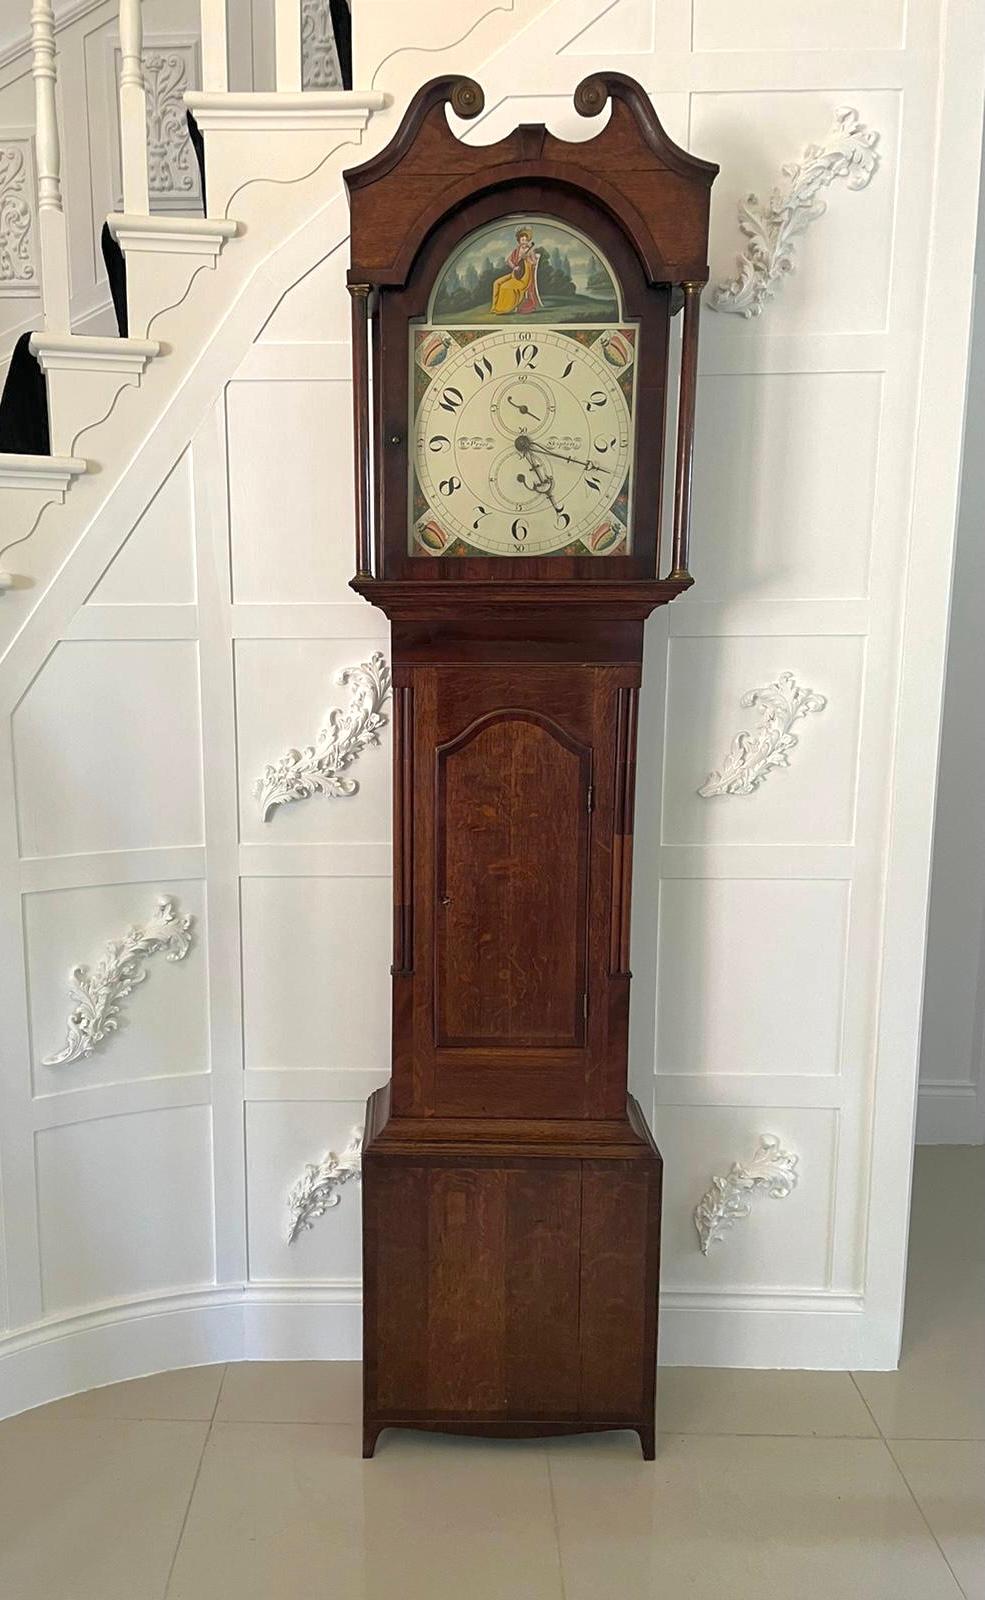 knotted grandfather clock